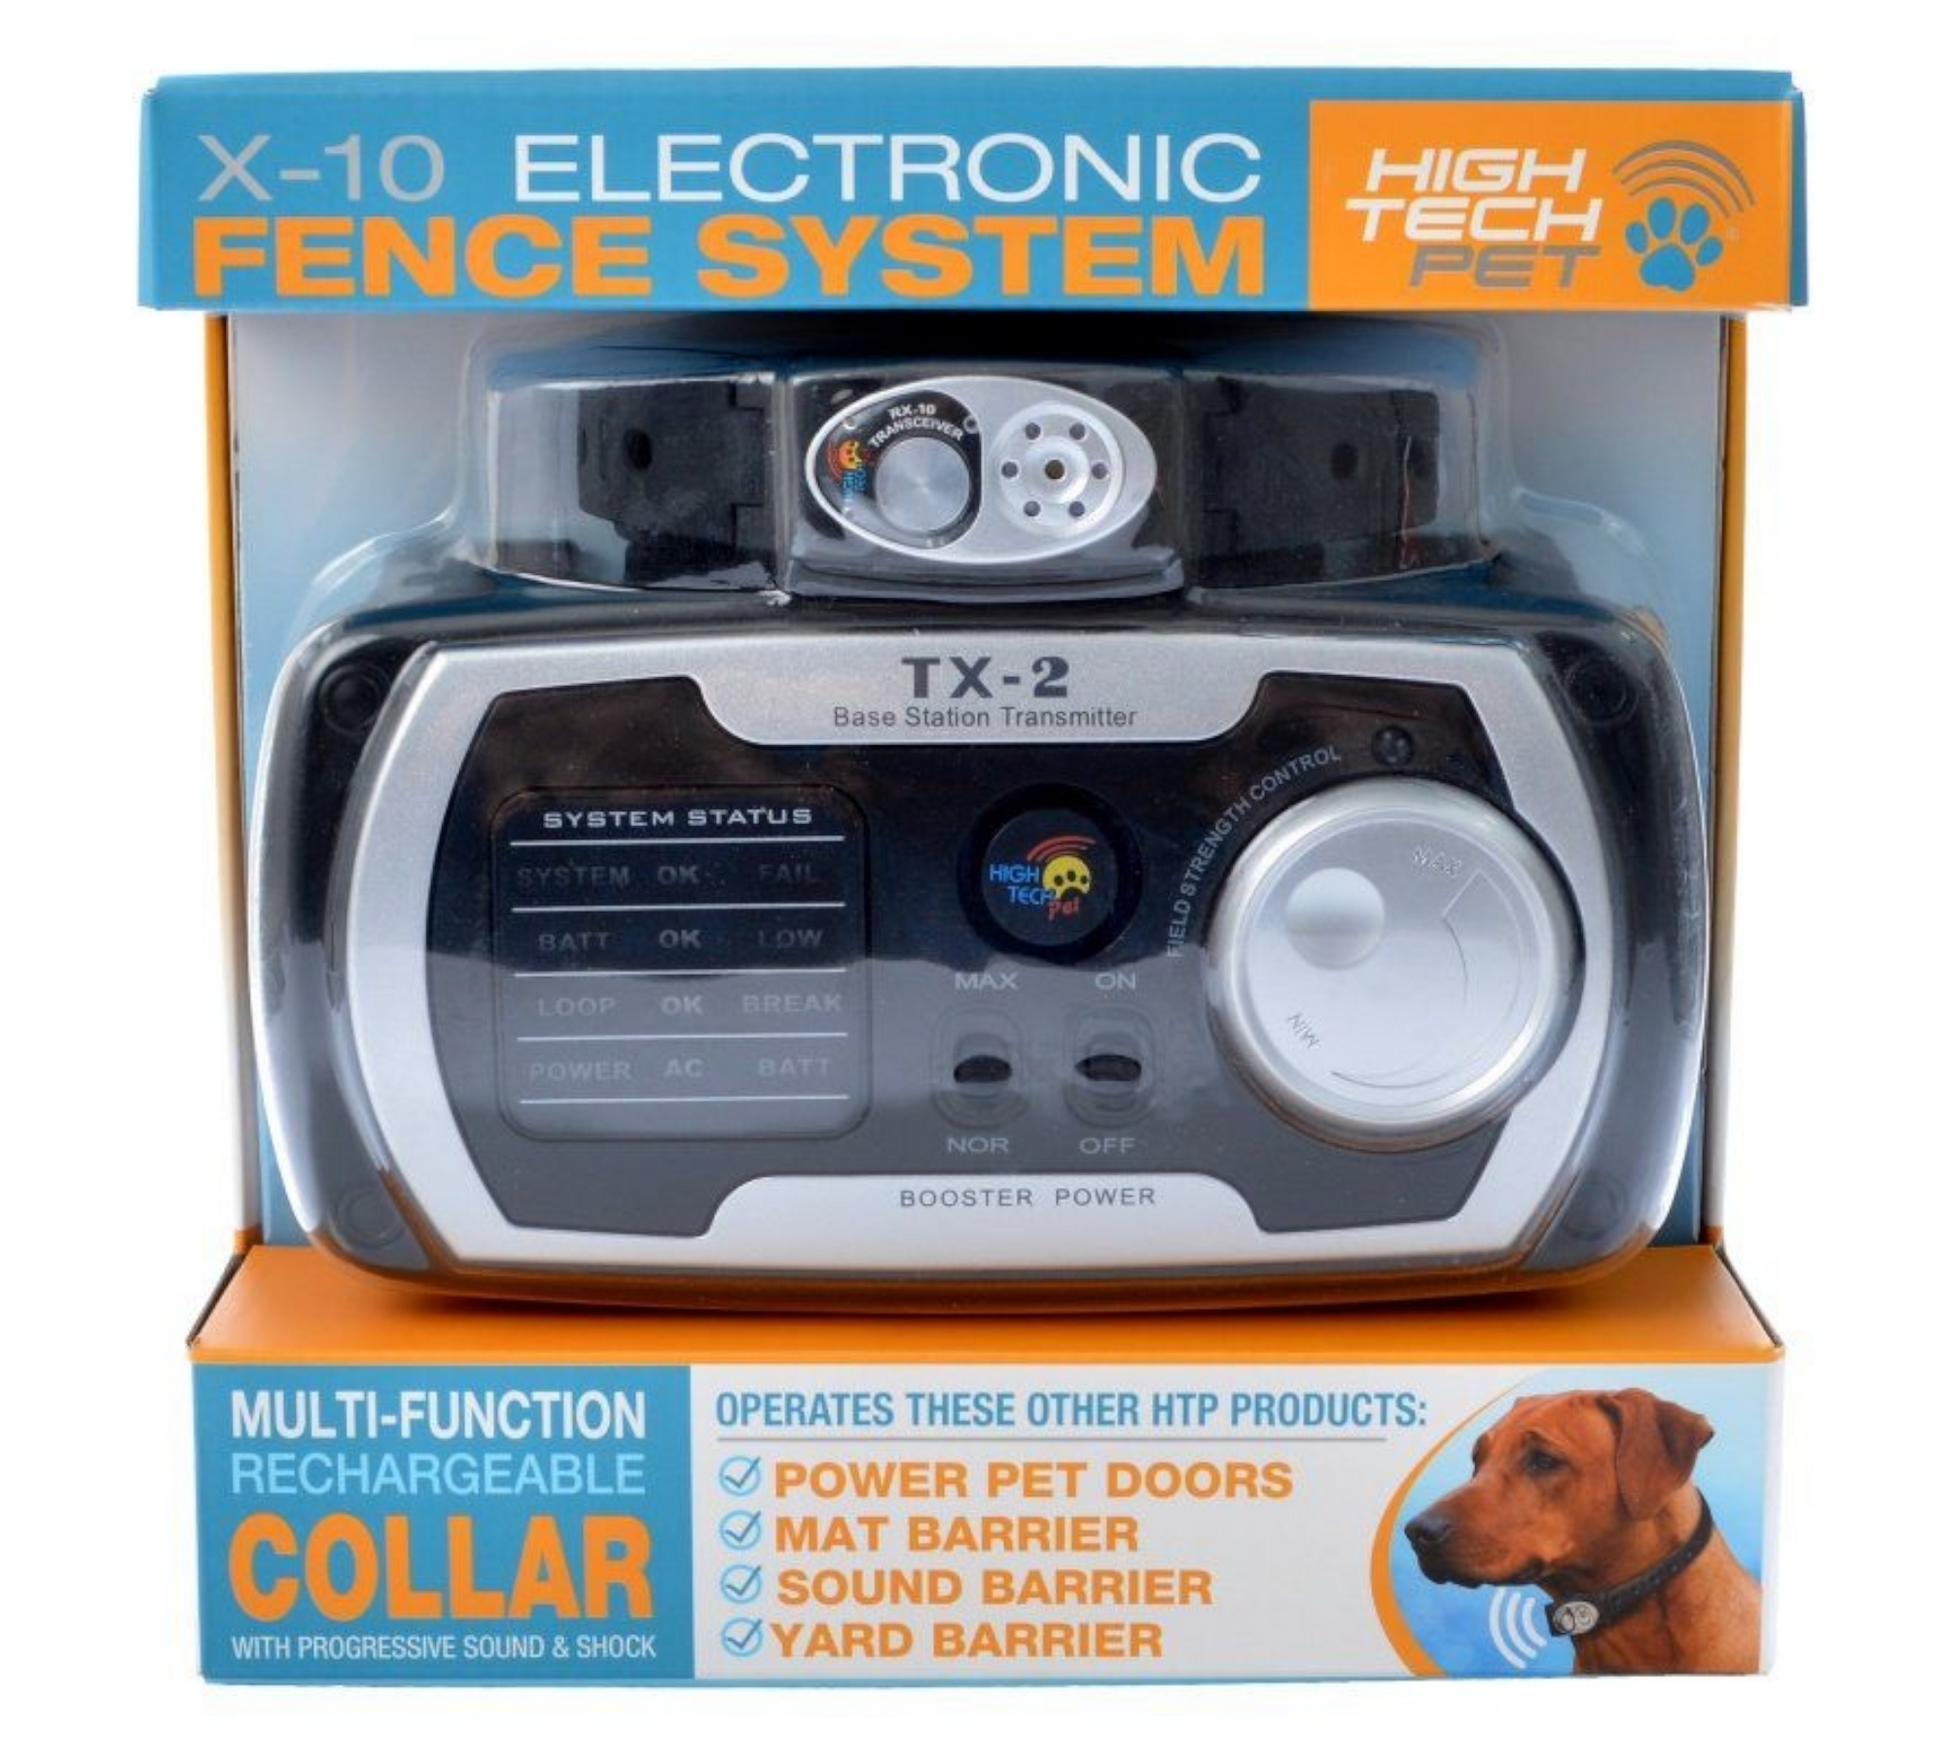 Canine's World Sound Dog Bark Collars High Tech Pet Products Humane Contain X-10 Electronic Dog Fence Containment System High Tech Pet